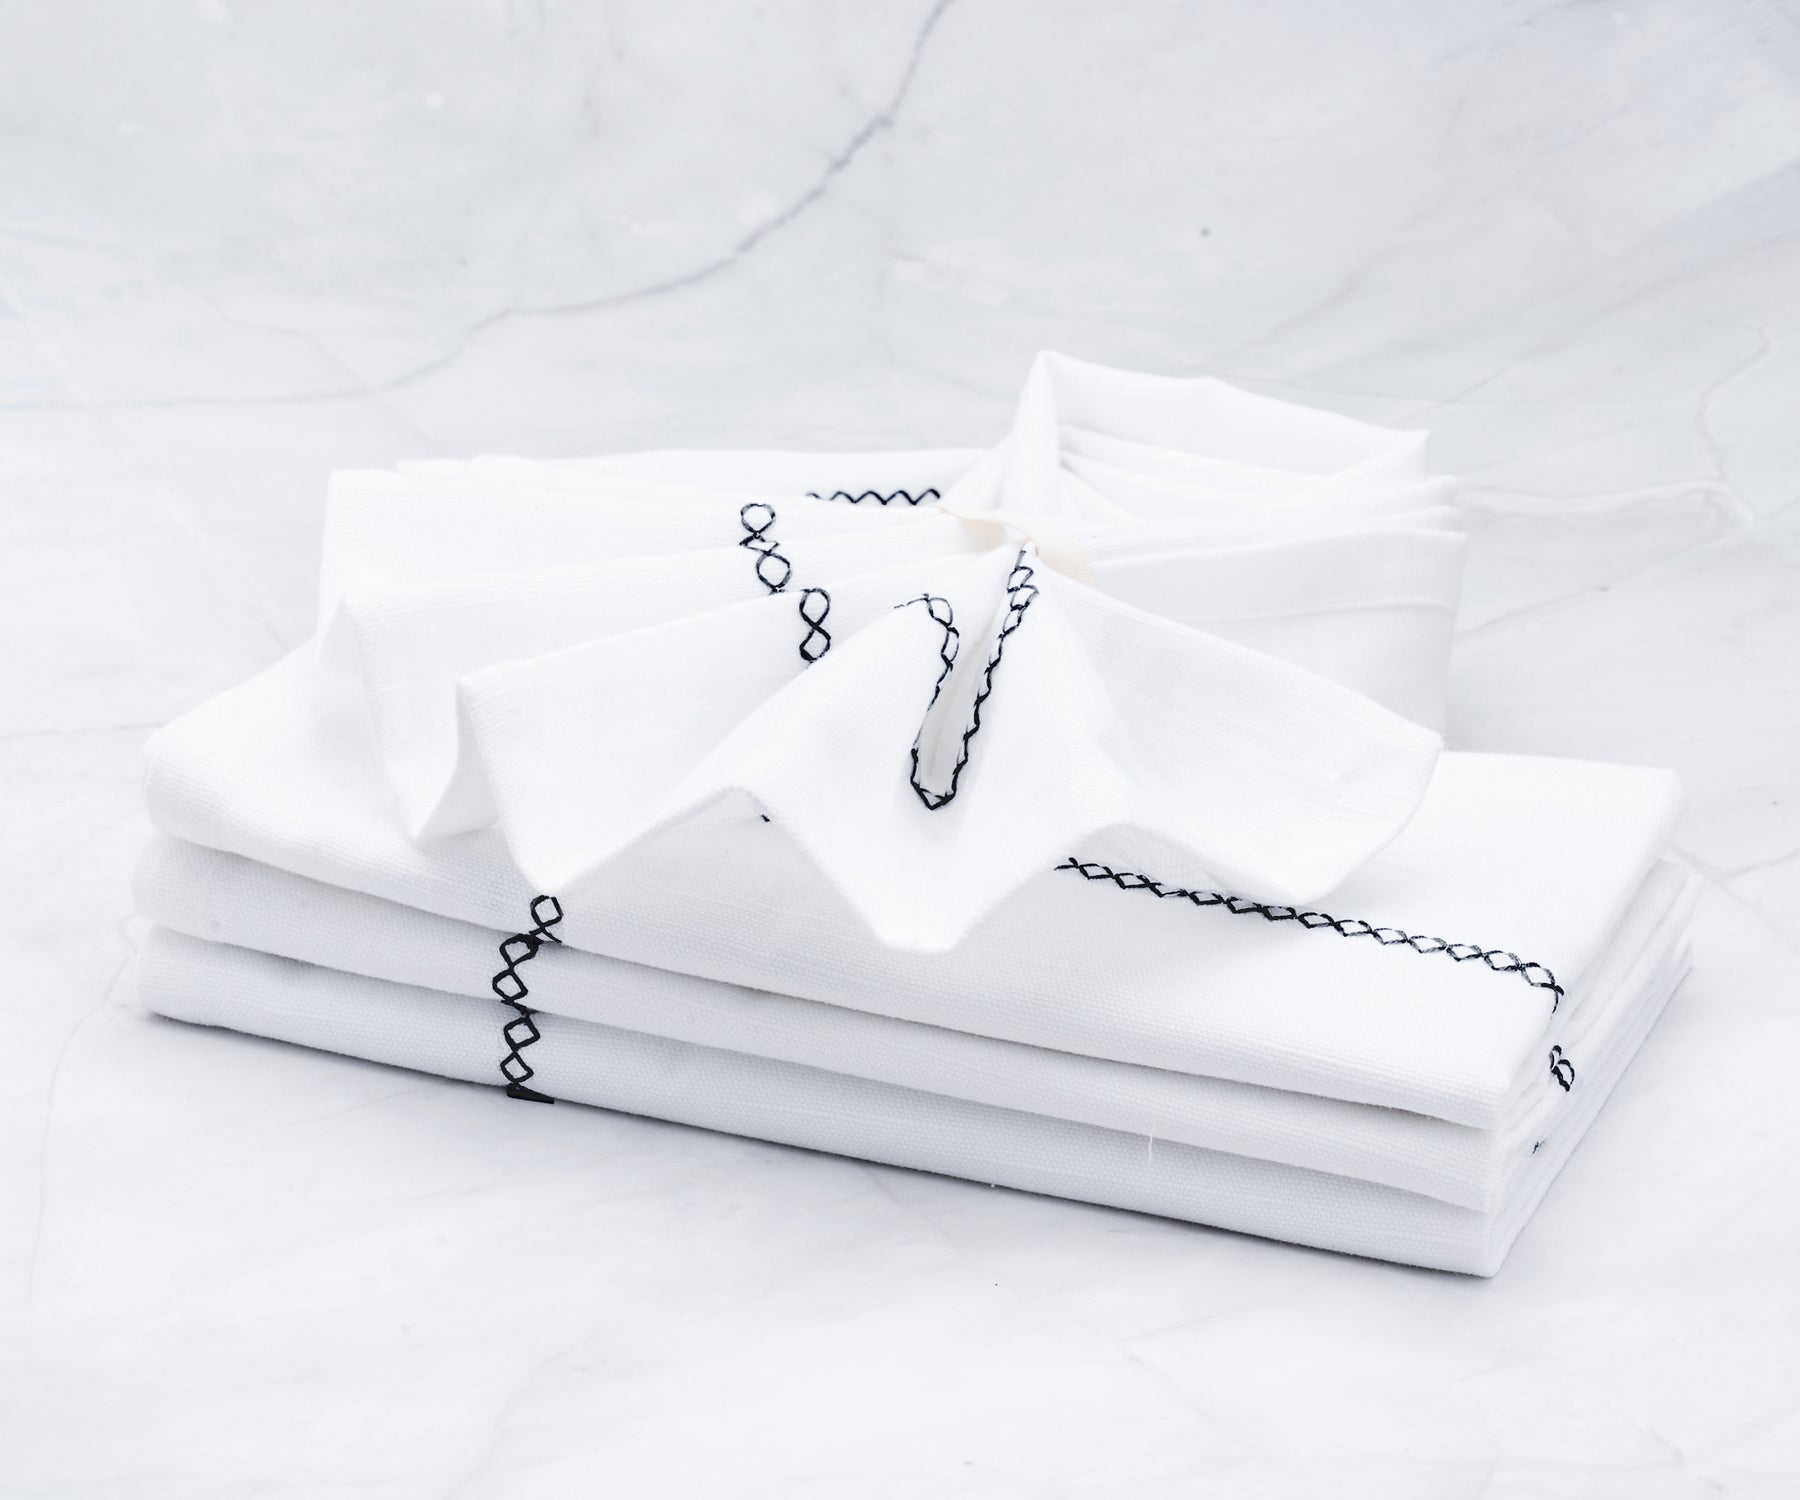 There are different types of dinner napkins available, including cloth, embroidered, bulk cotton, and folded napkins.